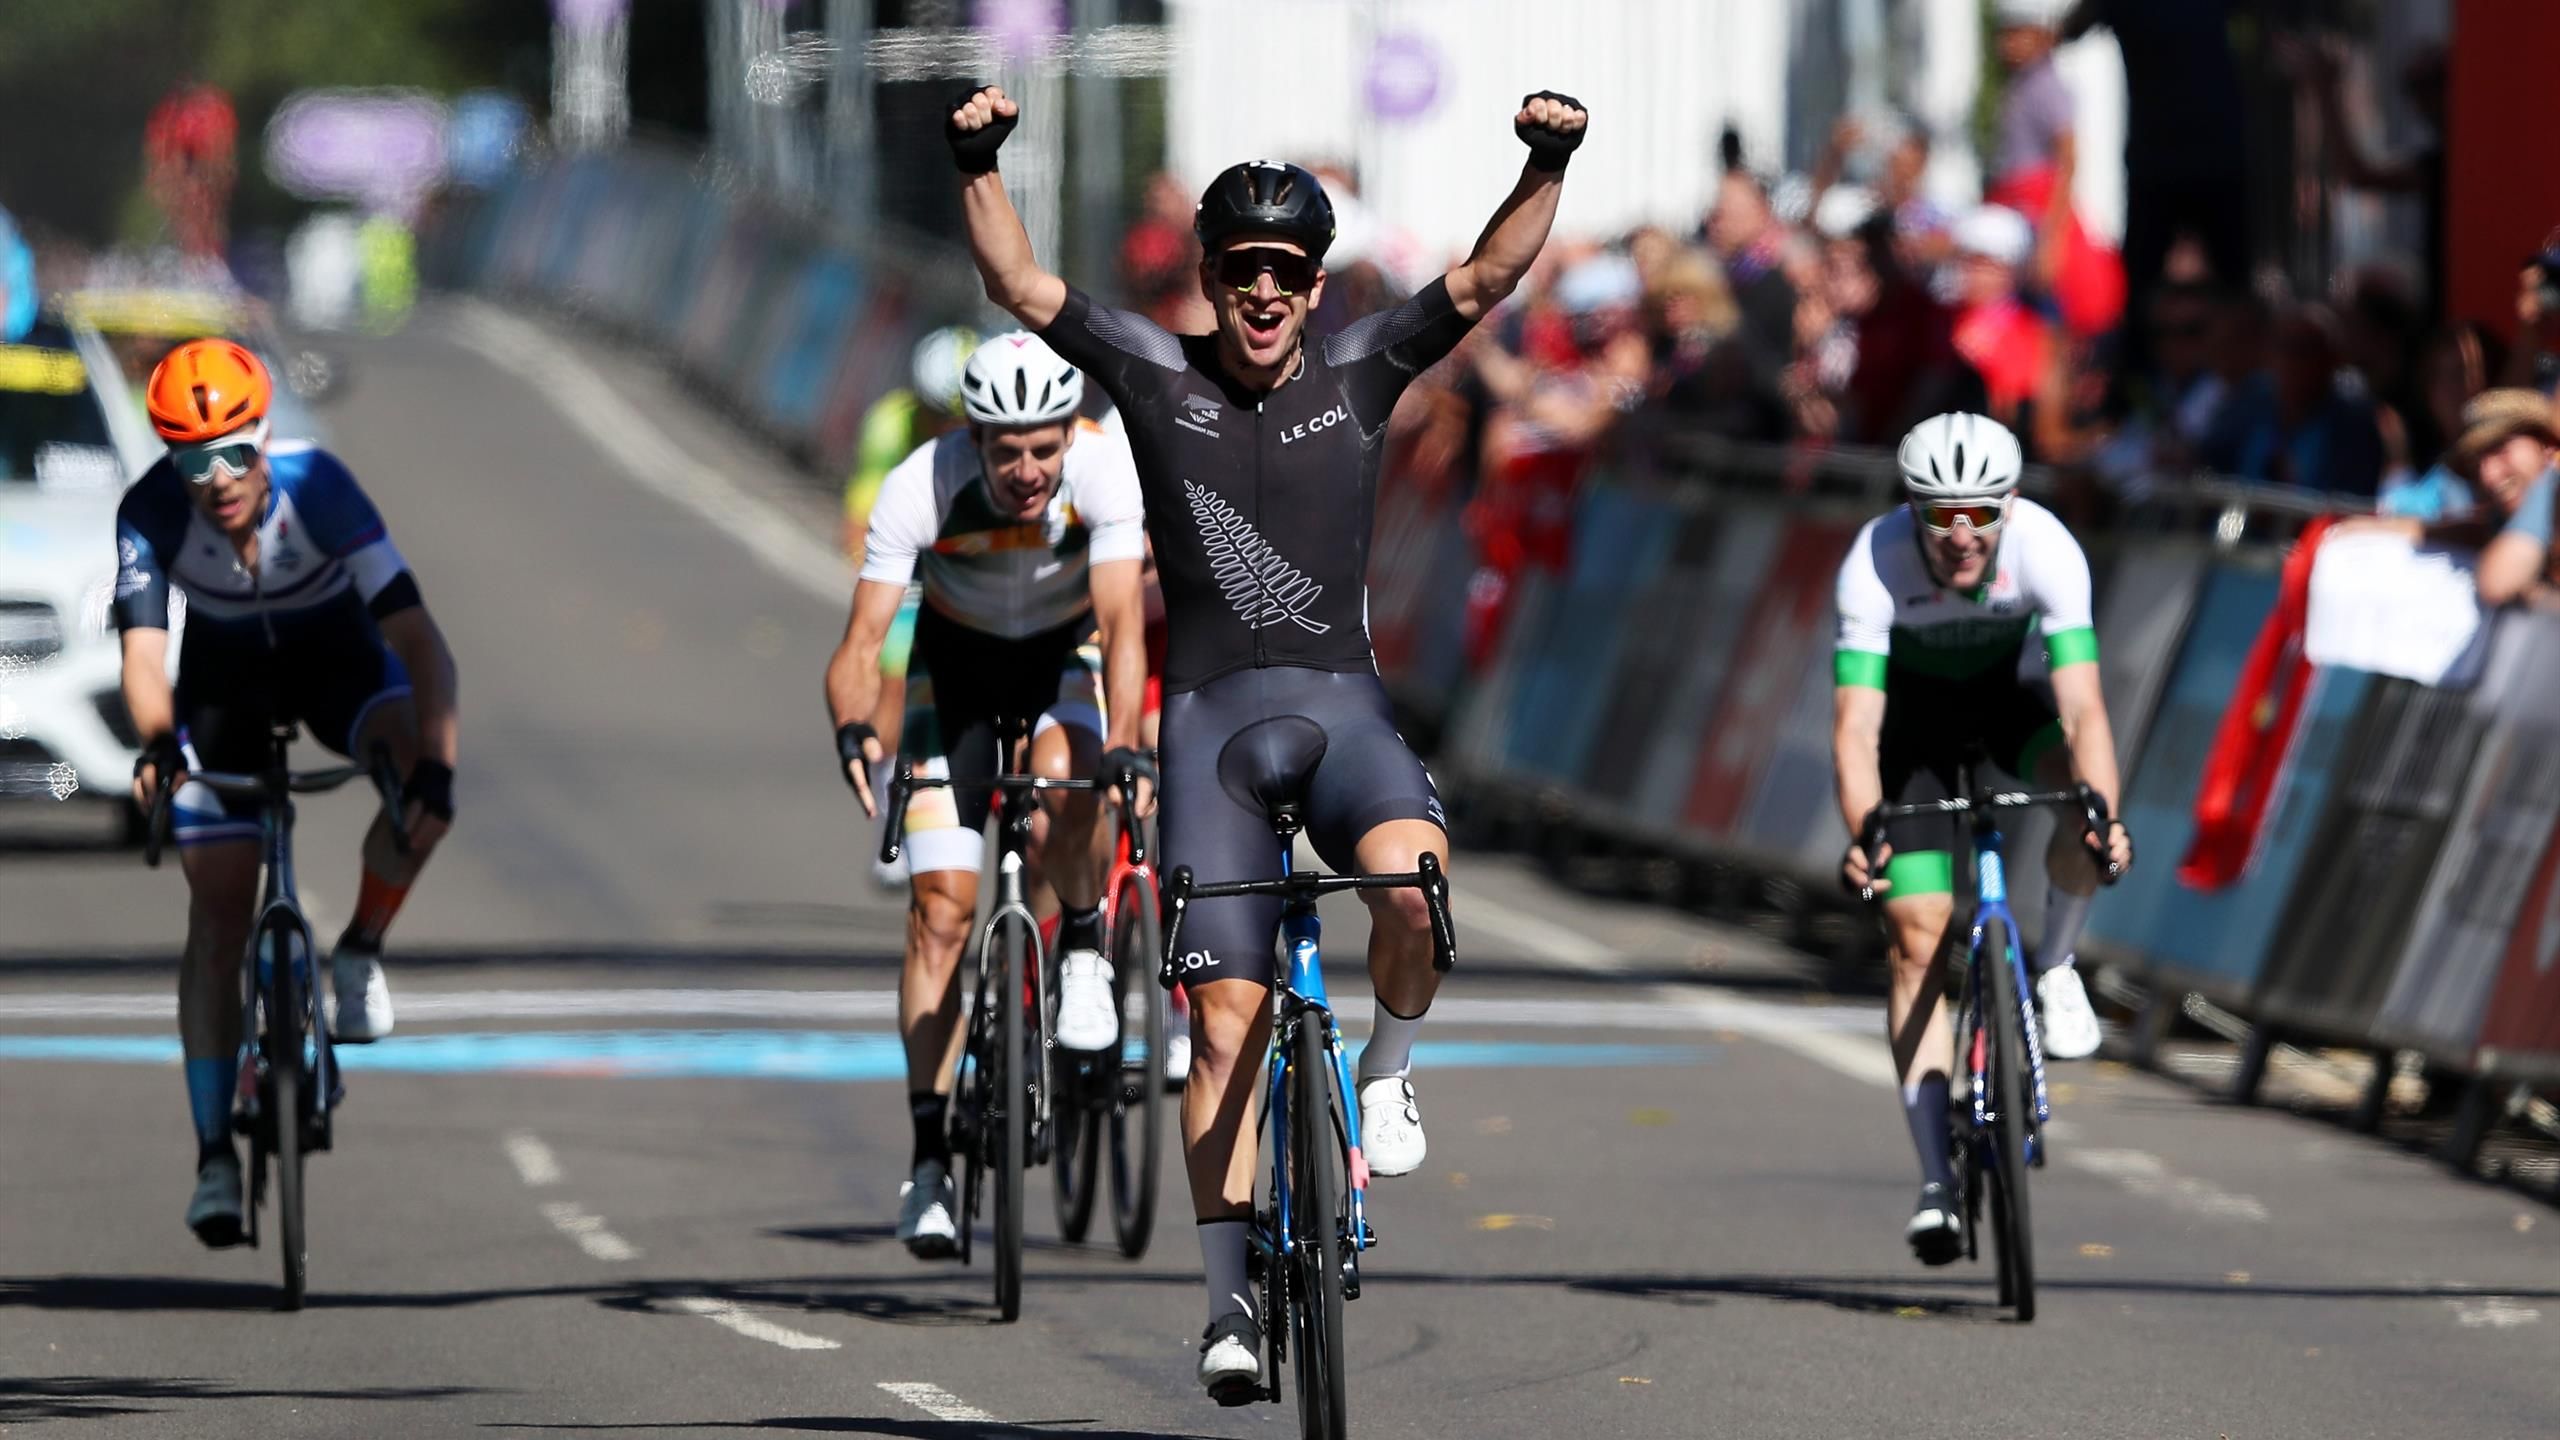 New Zealands Aaron Gate takes stunning win in mens road race, claims fourth gold medal of Commonwealth Games